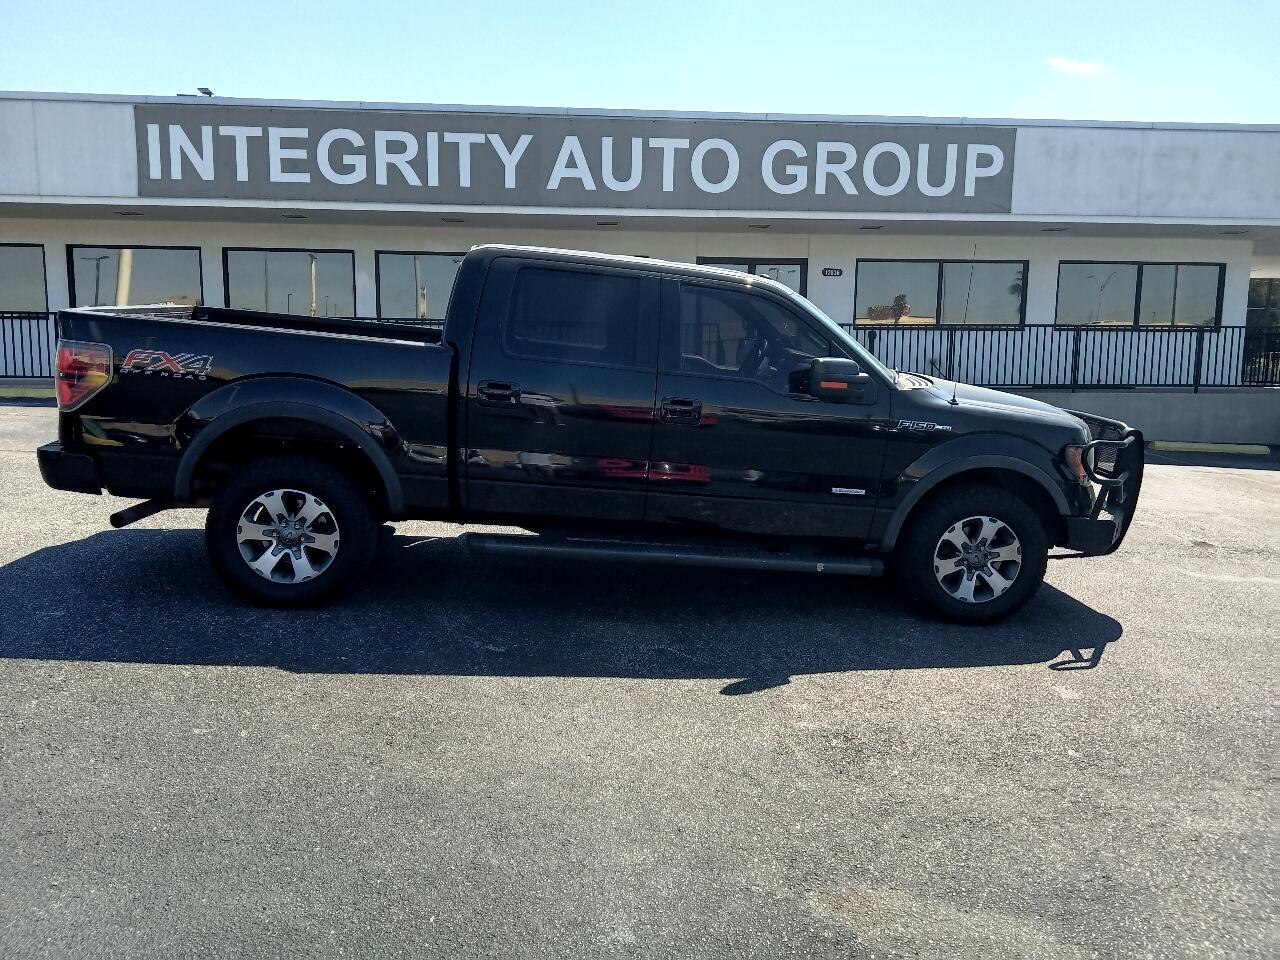 2013 Ford F-150 4WD SuperCrew 145" King Ranch